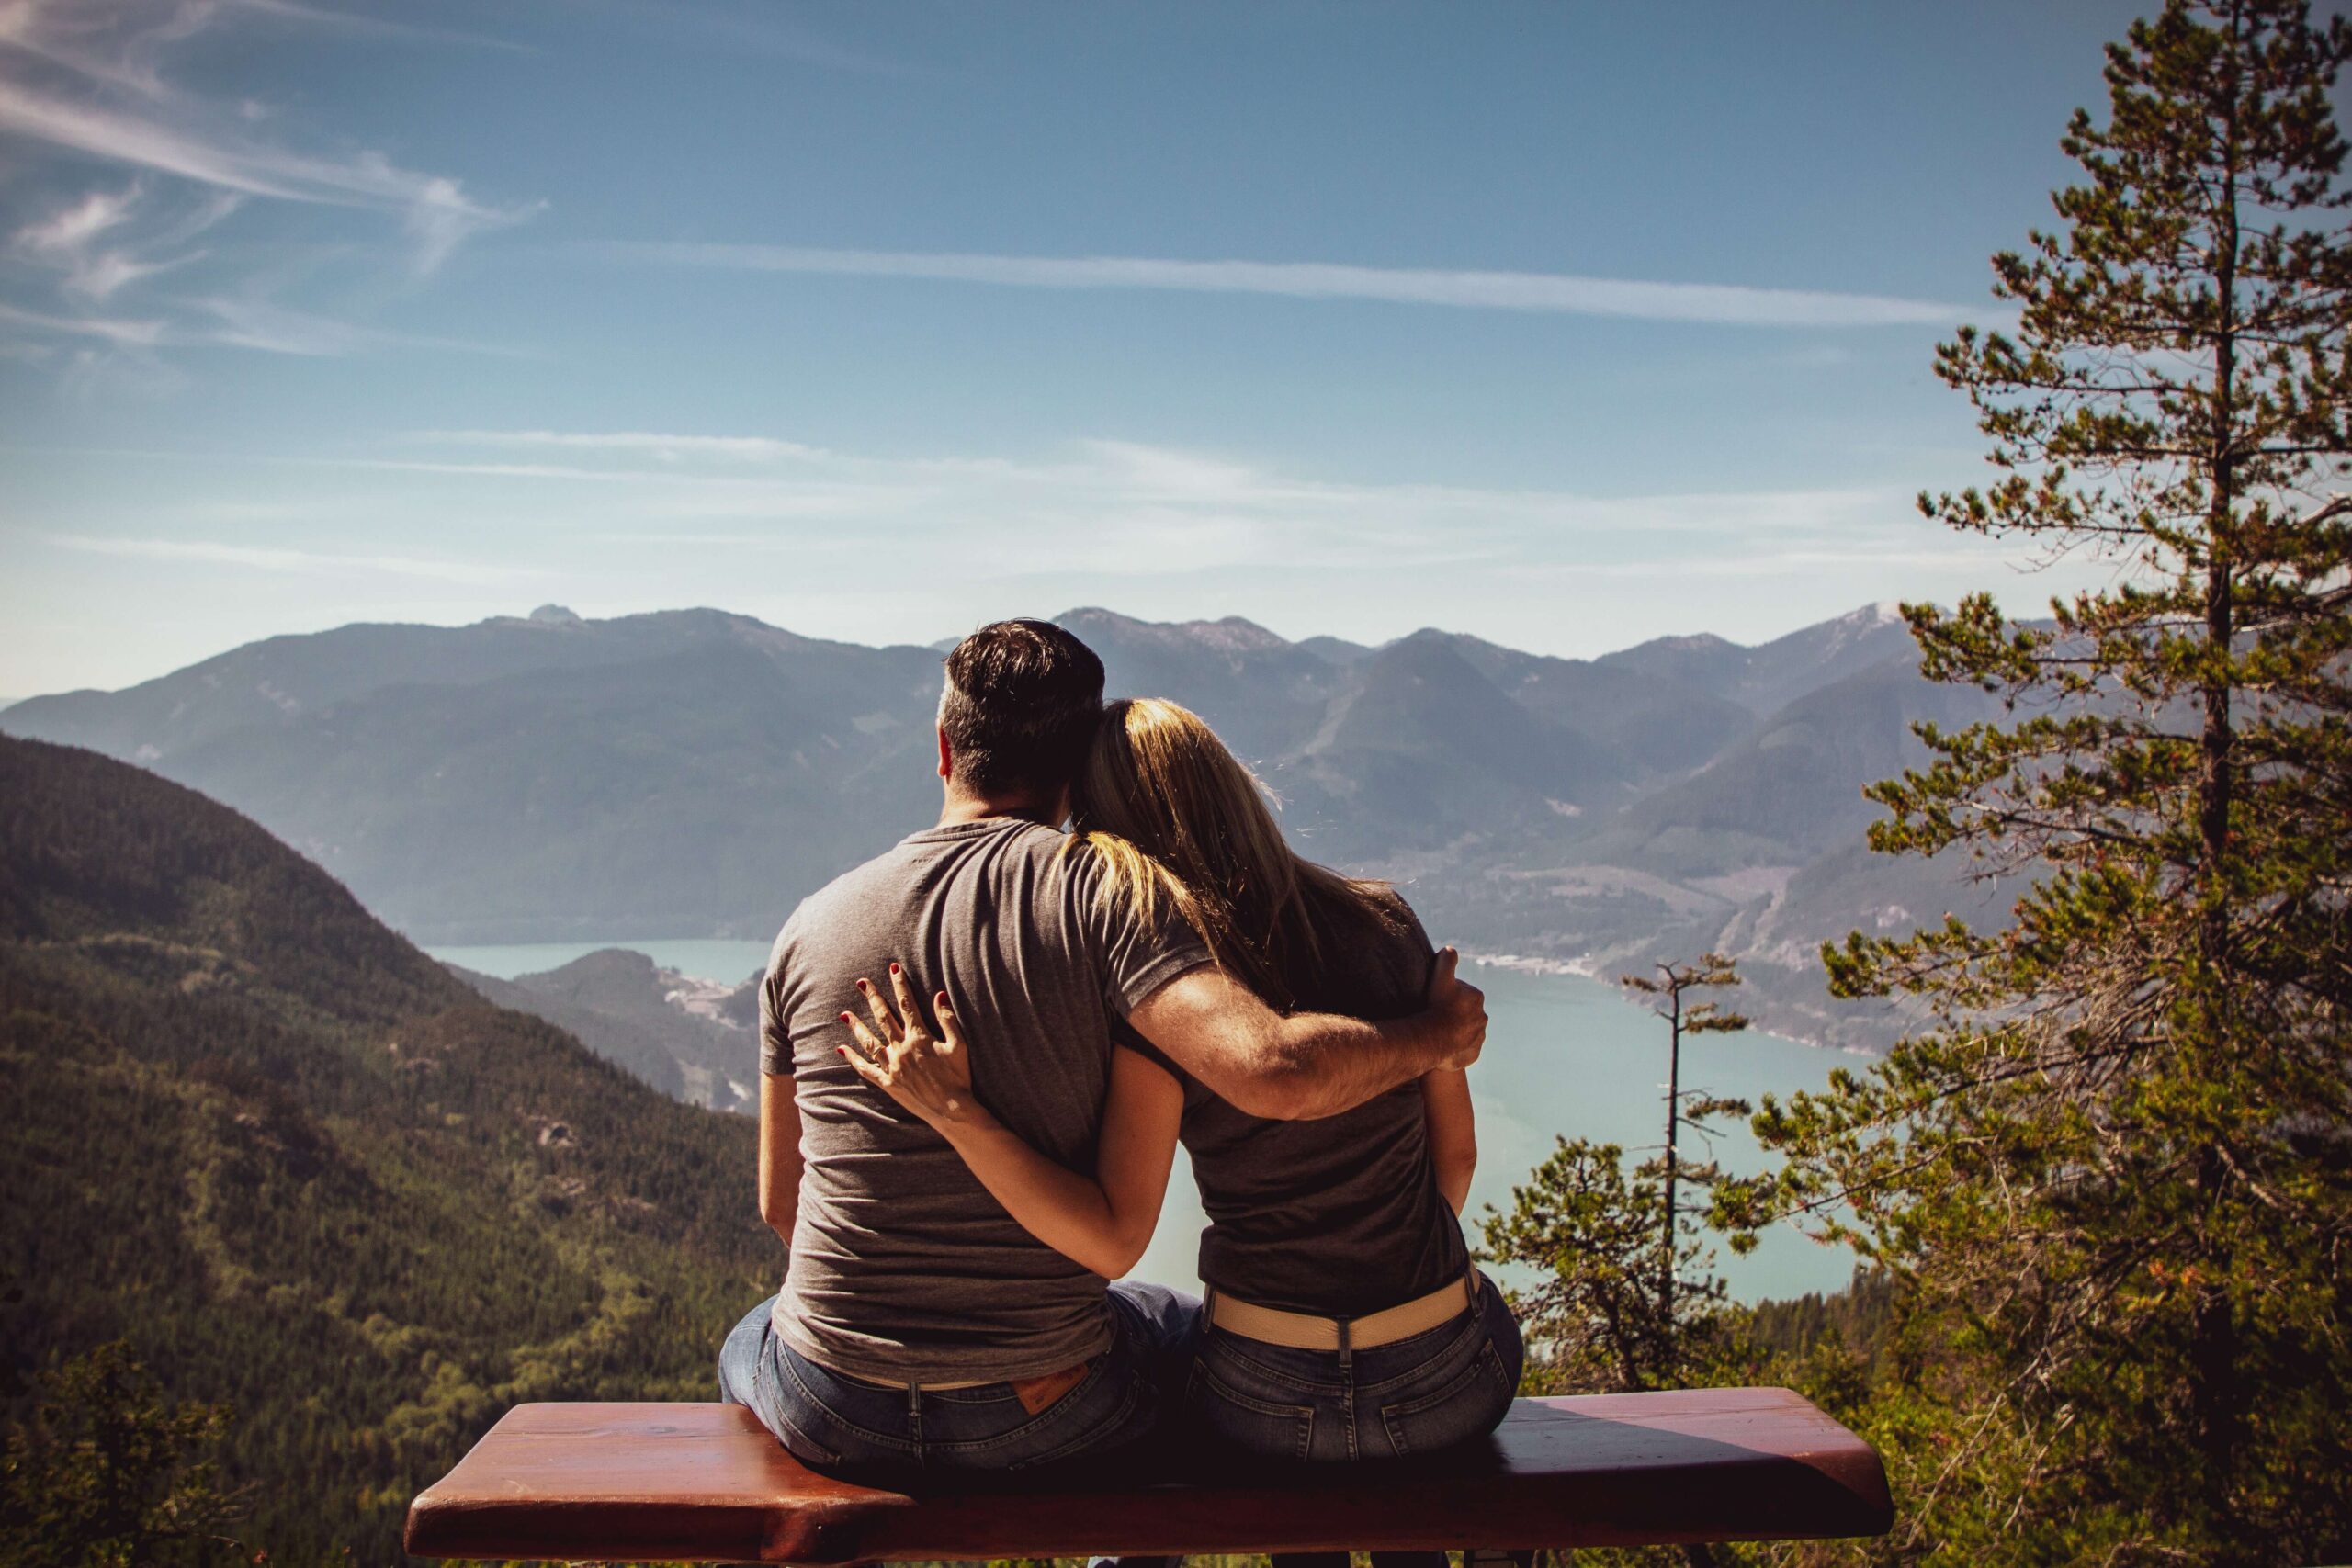 A couple embraces as they overlook the mountains in front of them. Strengthen your relationship in Couples Therapy in Pasadena, CA.